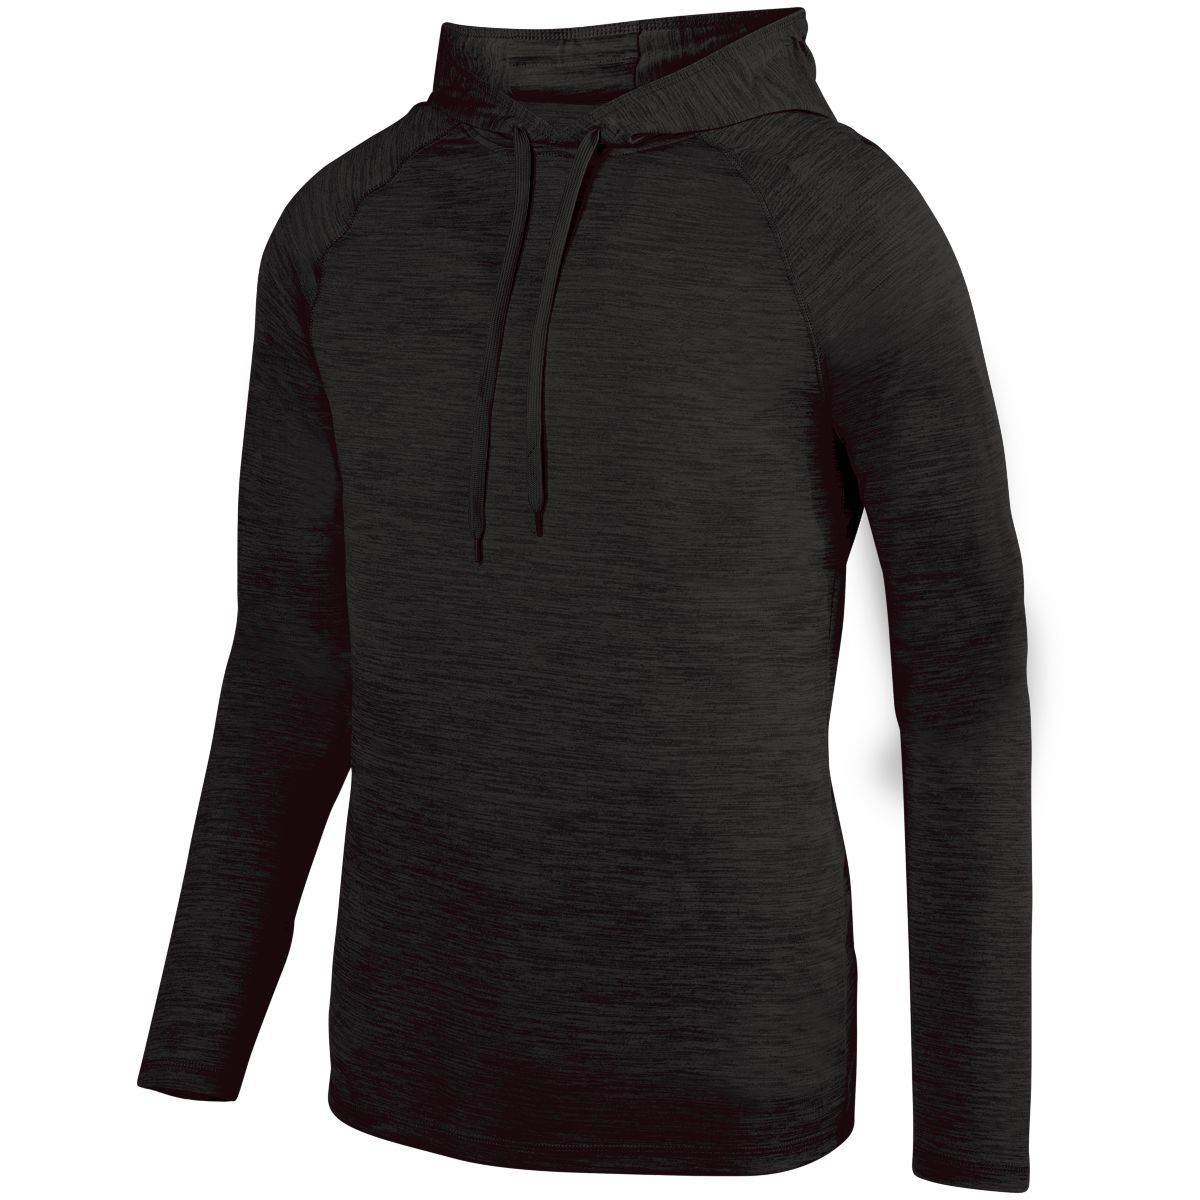 Augusta Sportswear Shadow Tonal Heather Hoodie in Black  -Part of the Adult, Augusta-Products, Shirts, Tonal-Fleece-Collection product lines at KanaleyCreations.com